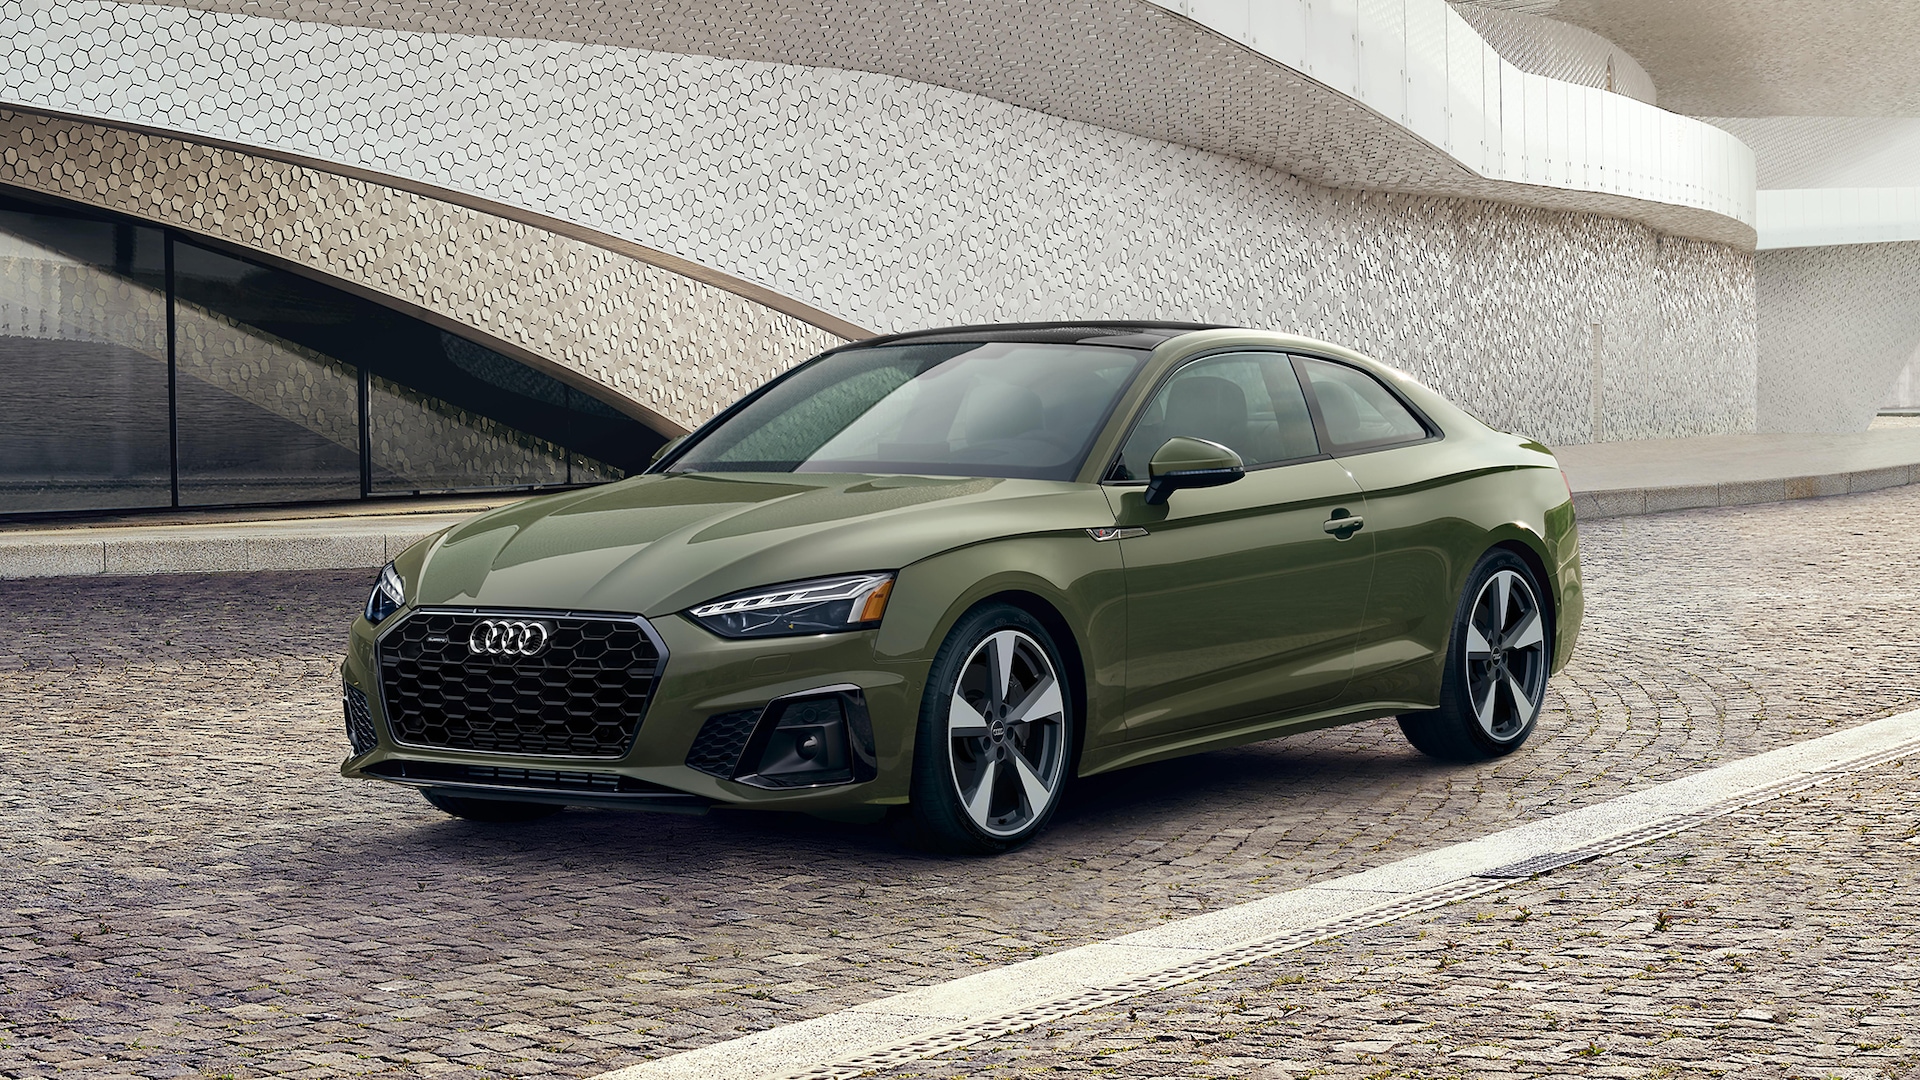 The 2020 Audi A5 and S5 Family Receives Mild Botox Injections